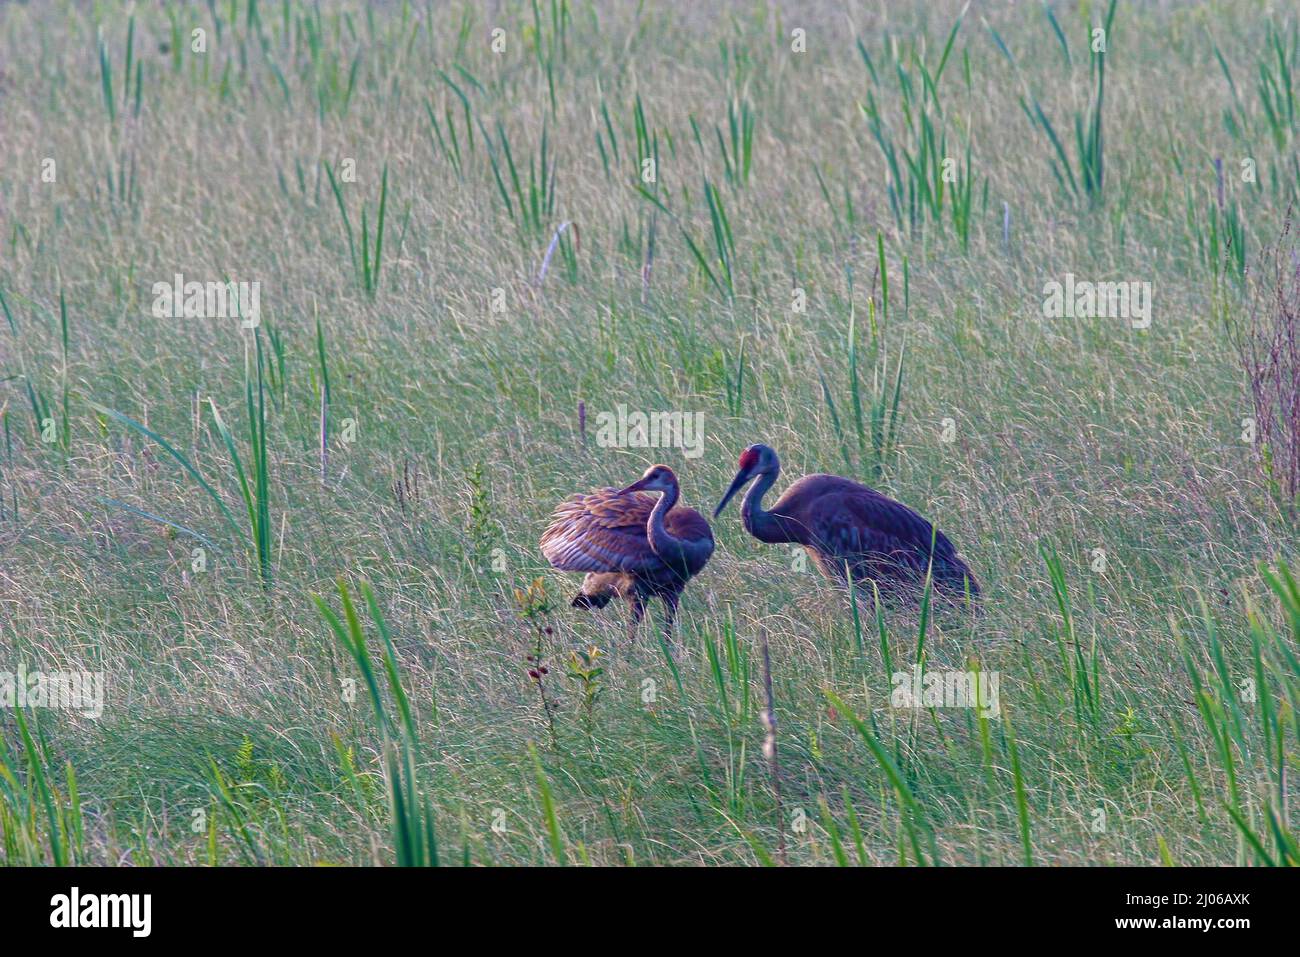 An Adult and young Sandhill Crane, Grus canadensis, in long grass Stock Photo